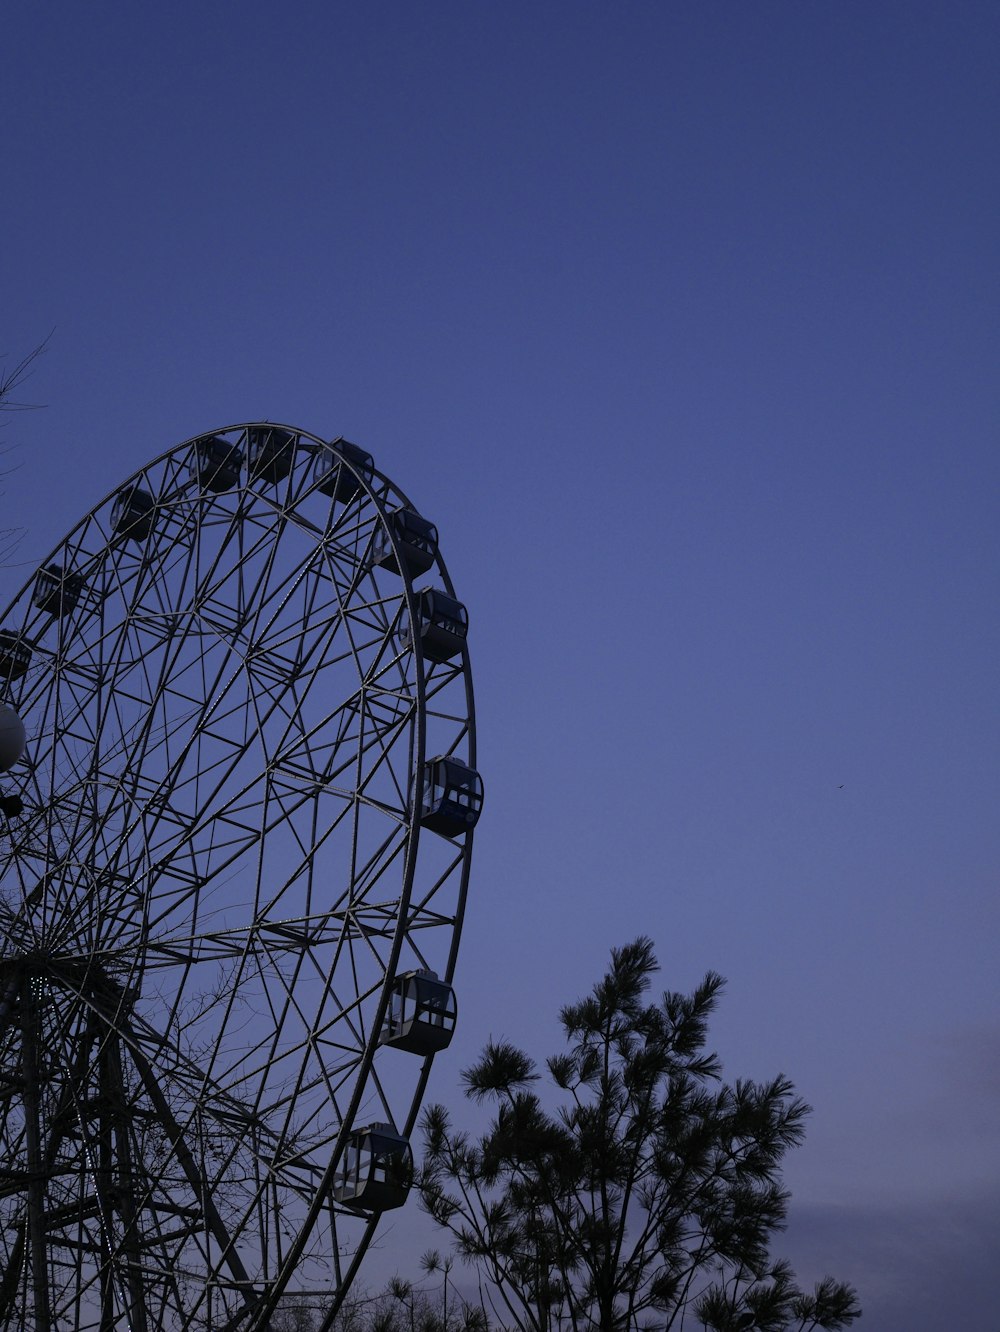 a ferris wheel with trees in the background